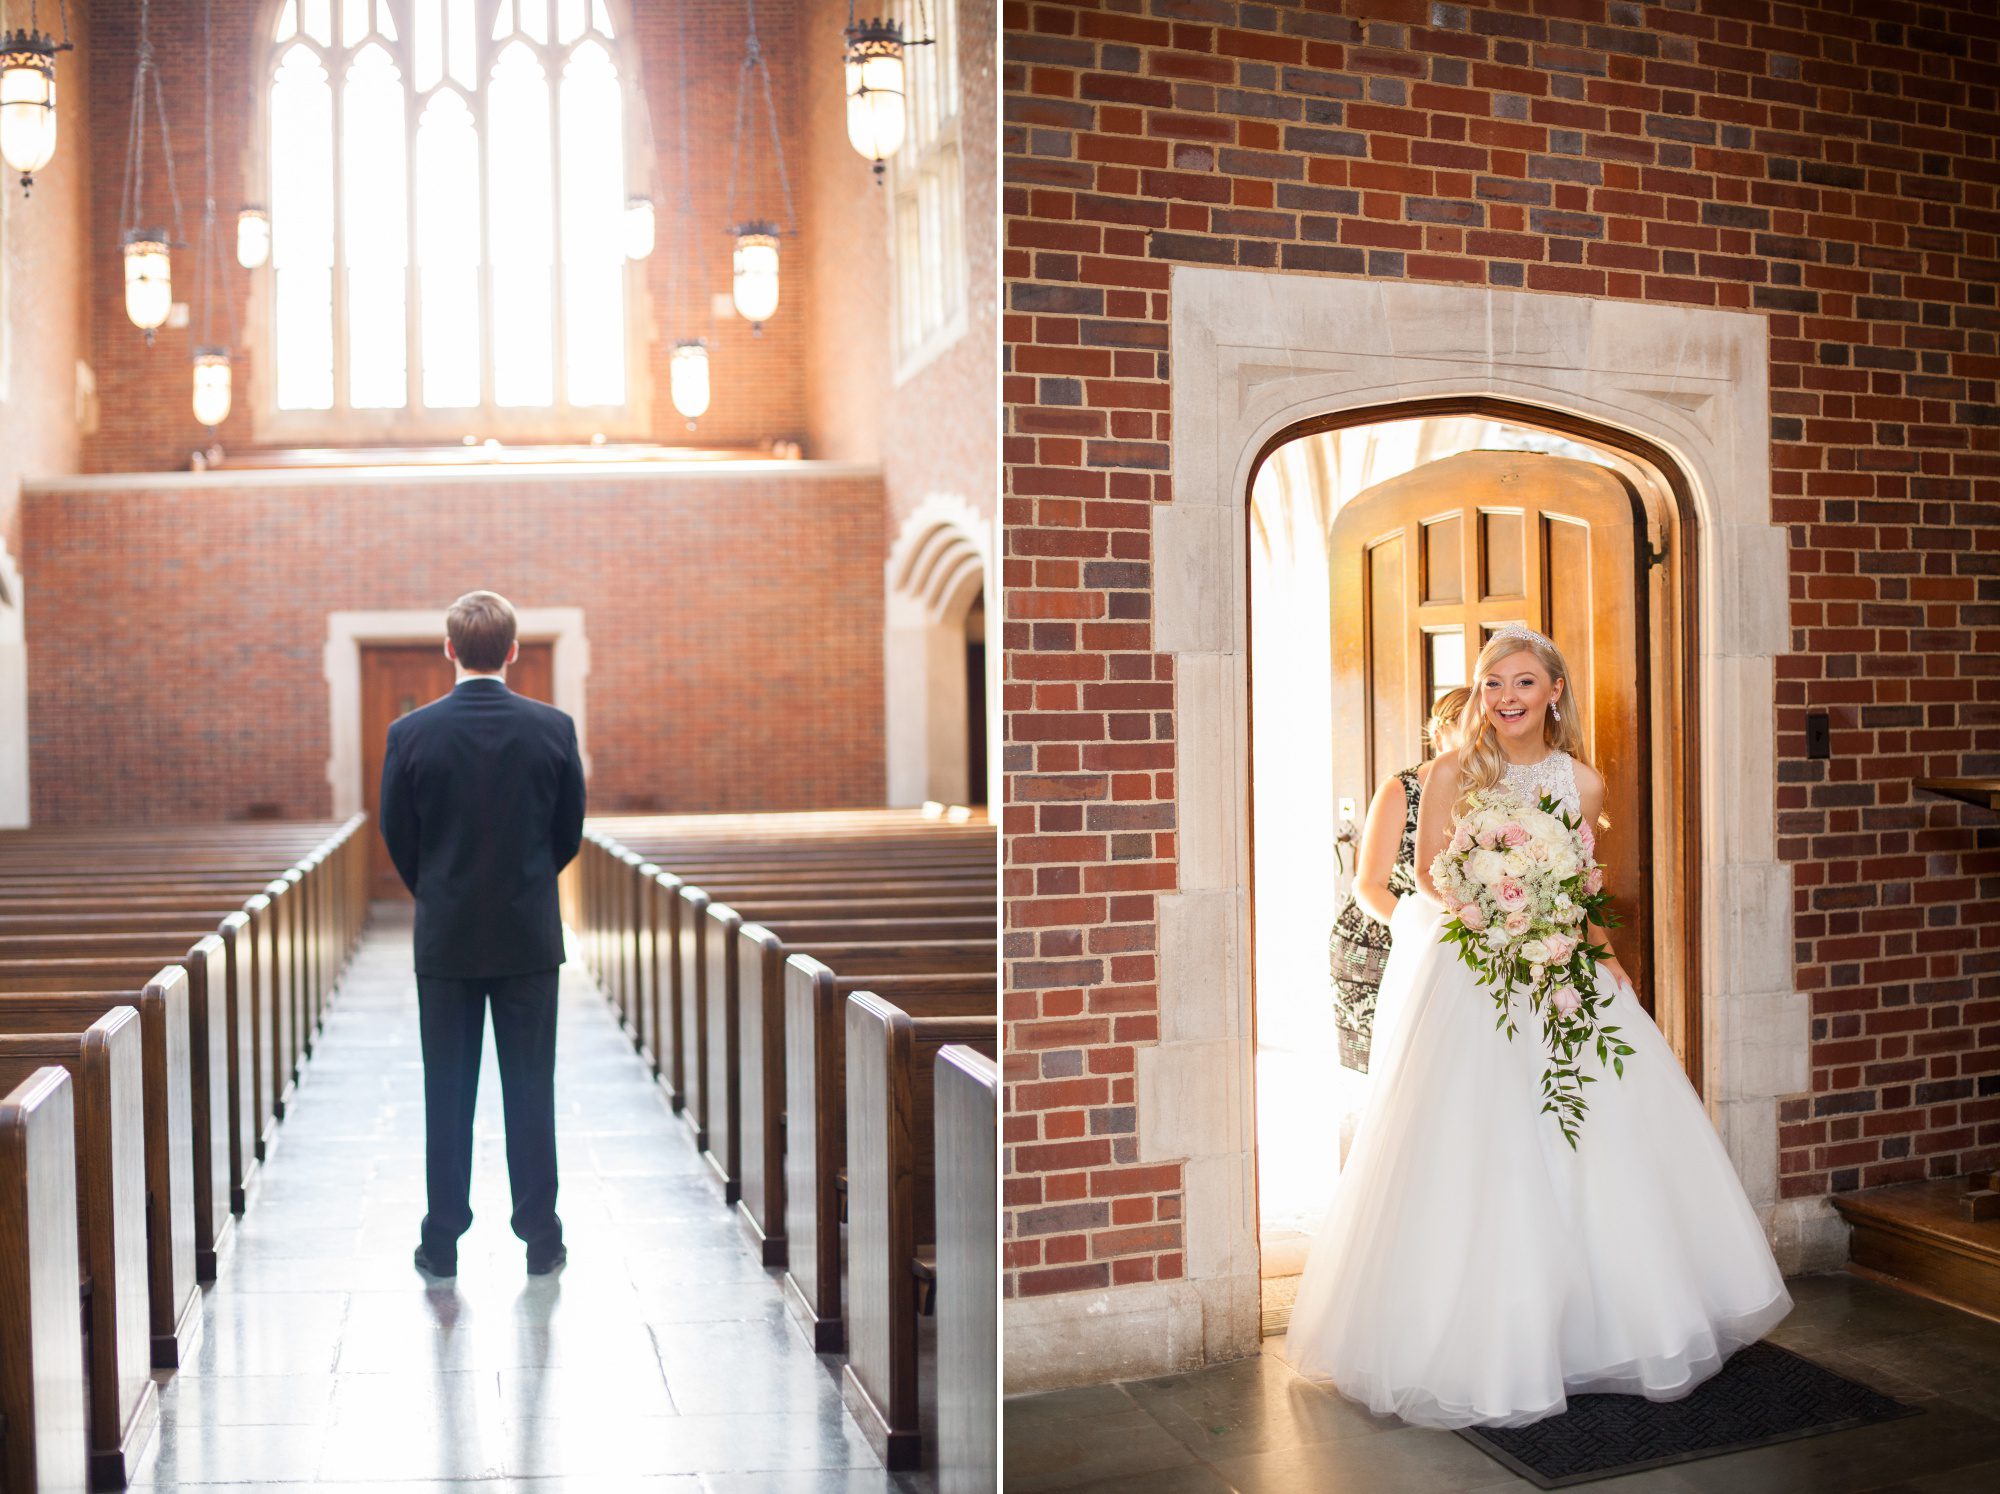 Bride and groom before first look -Wightman Chapel at Scarritt Bennett before summer wedding ceremony in Nashville, TN. Photography by Krista Lee Photography.